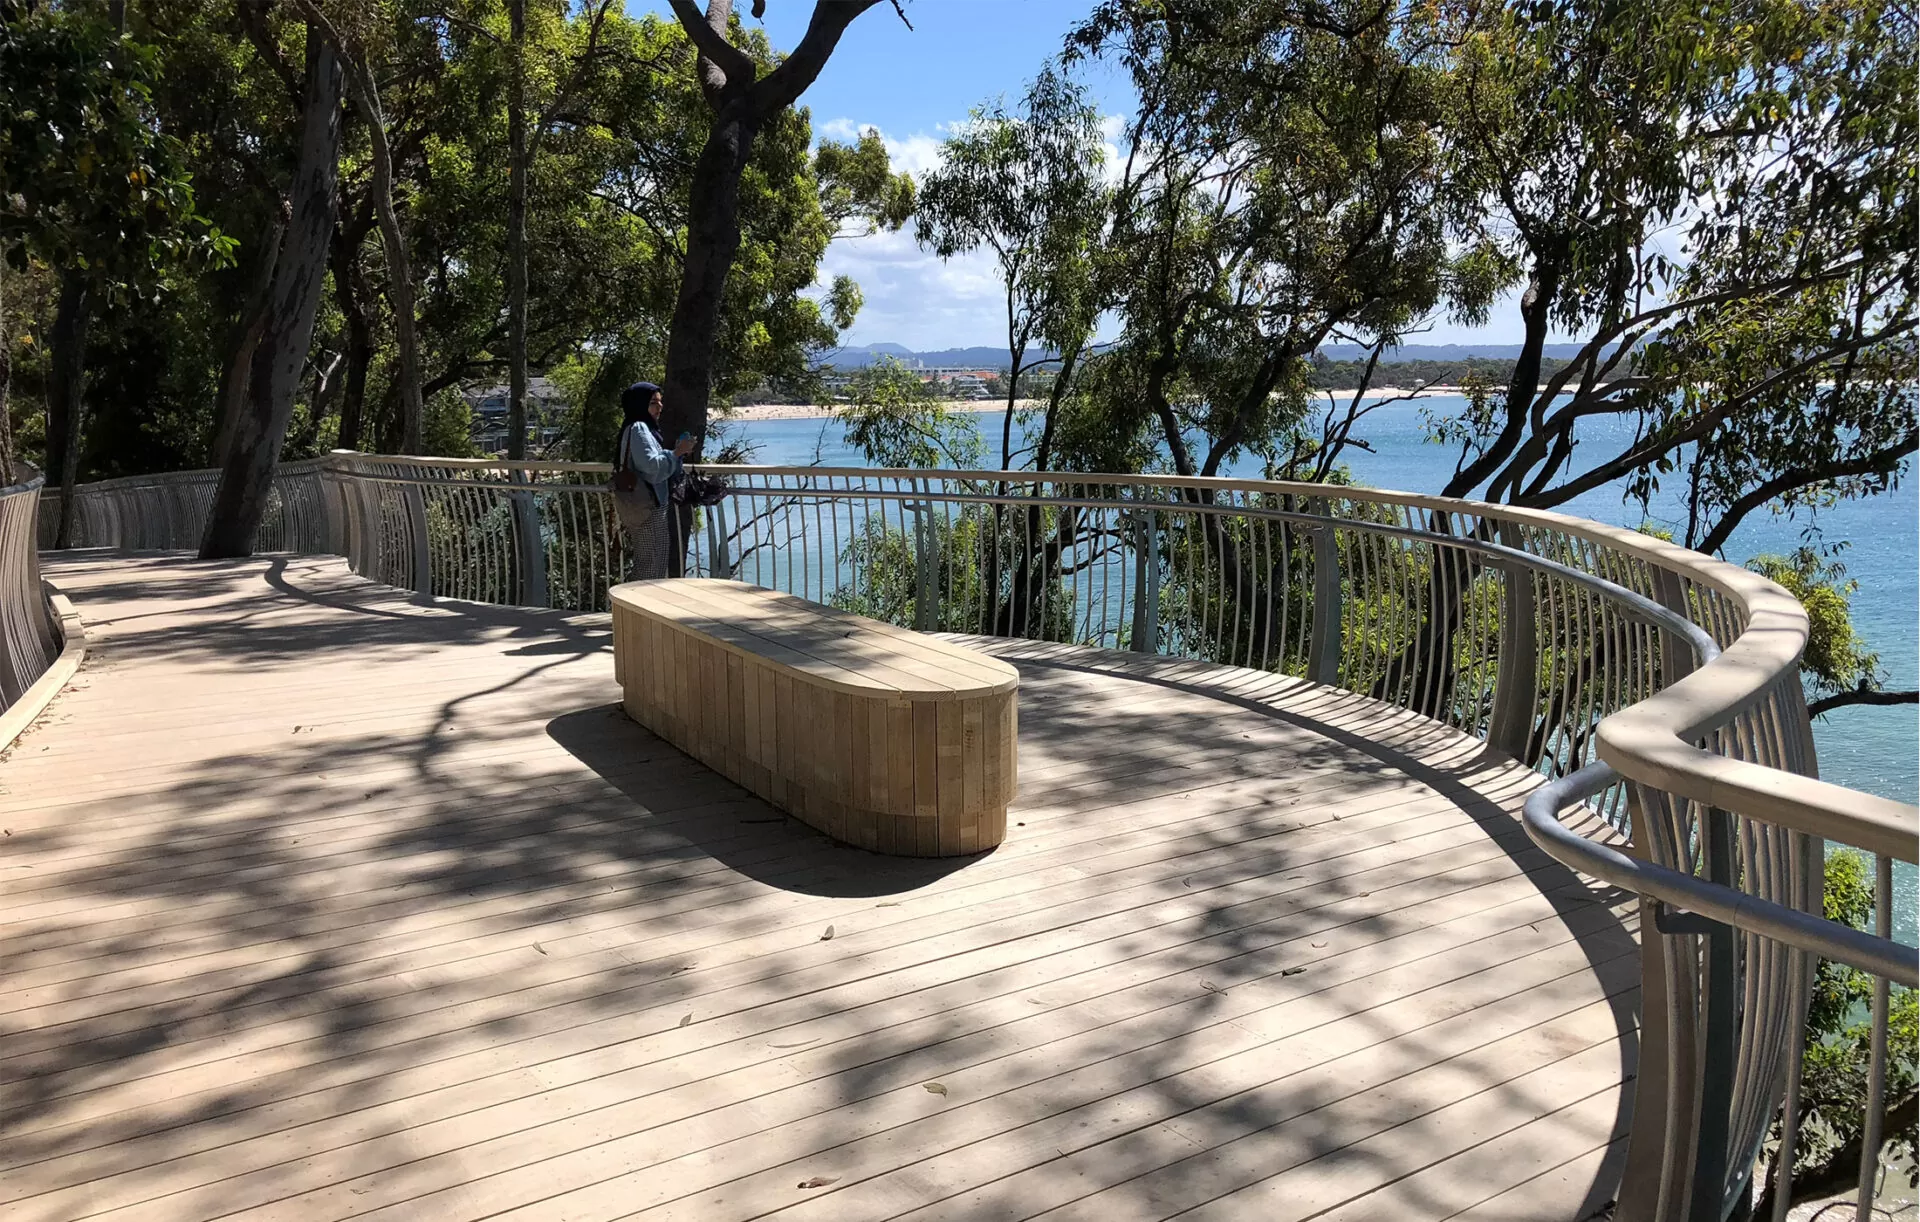 Boardwalk along the coast of Noosa Heads with Accoya wood for the decking.